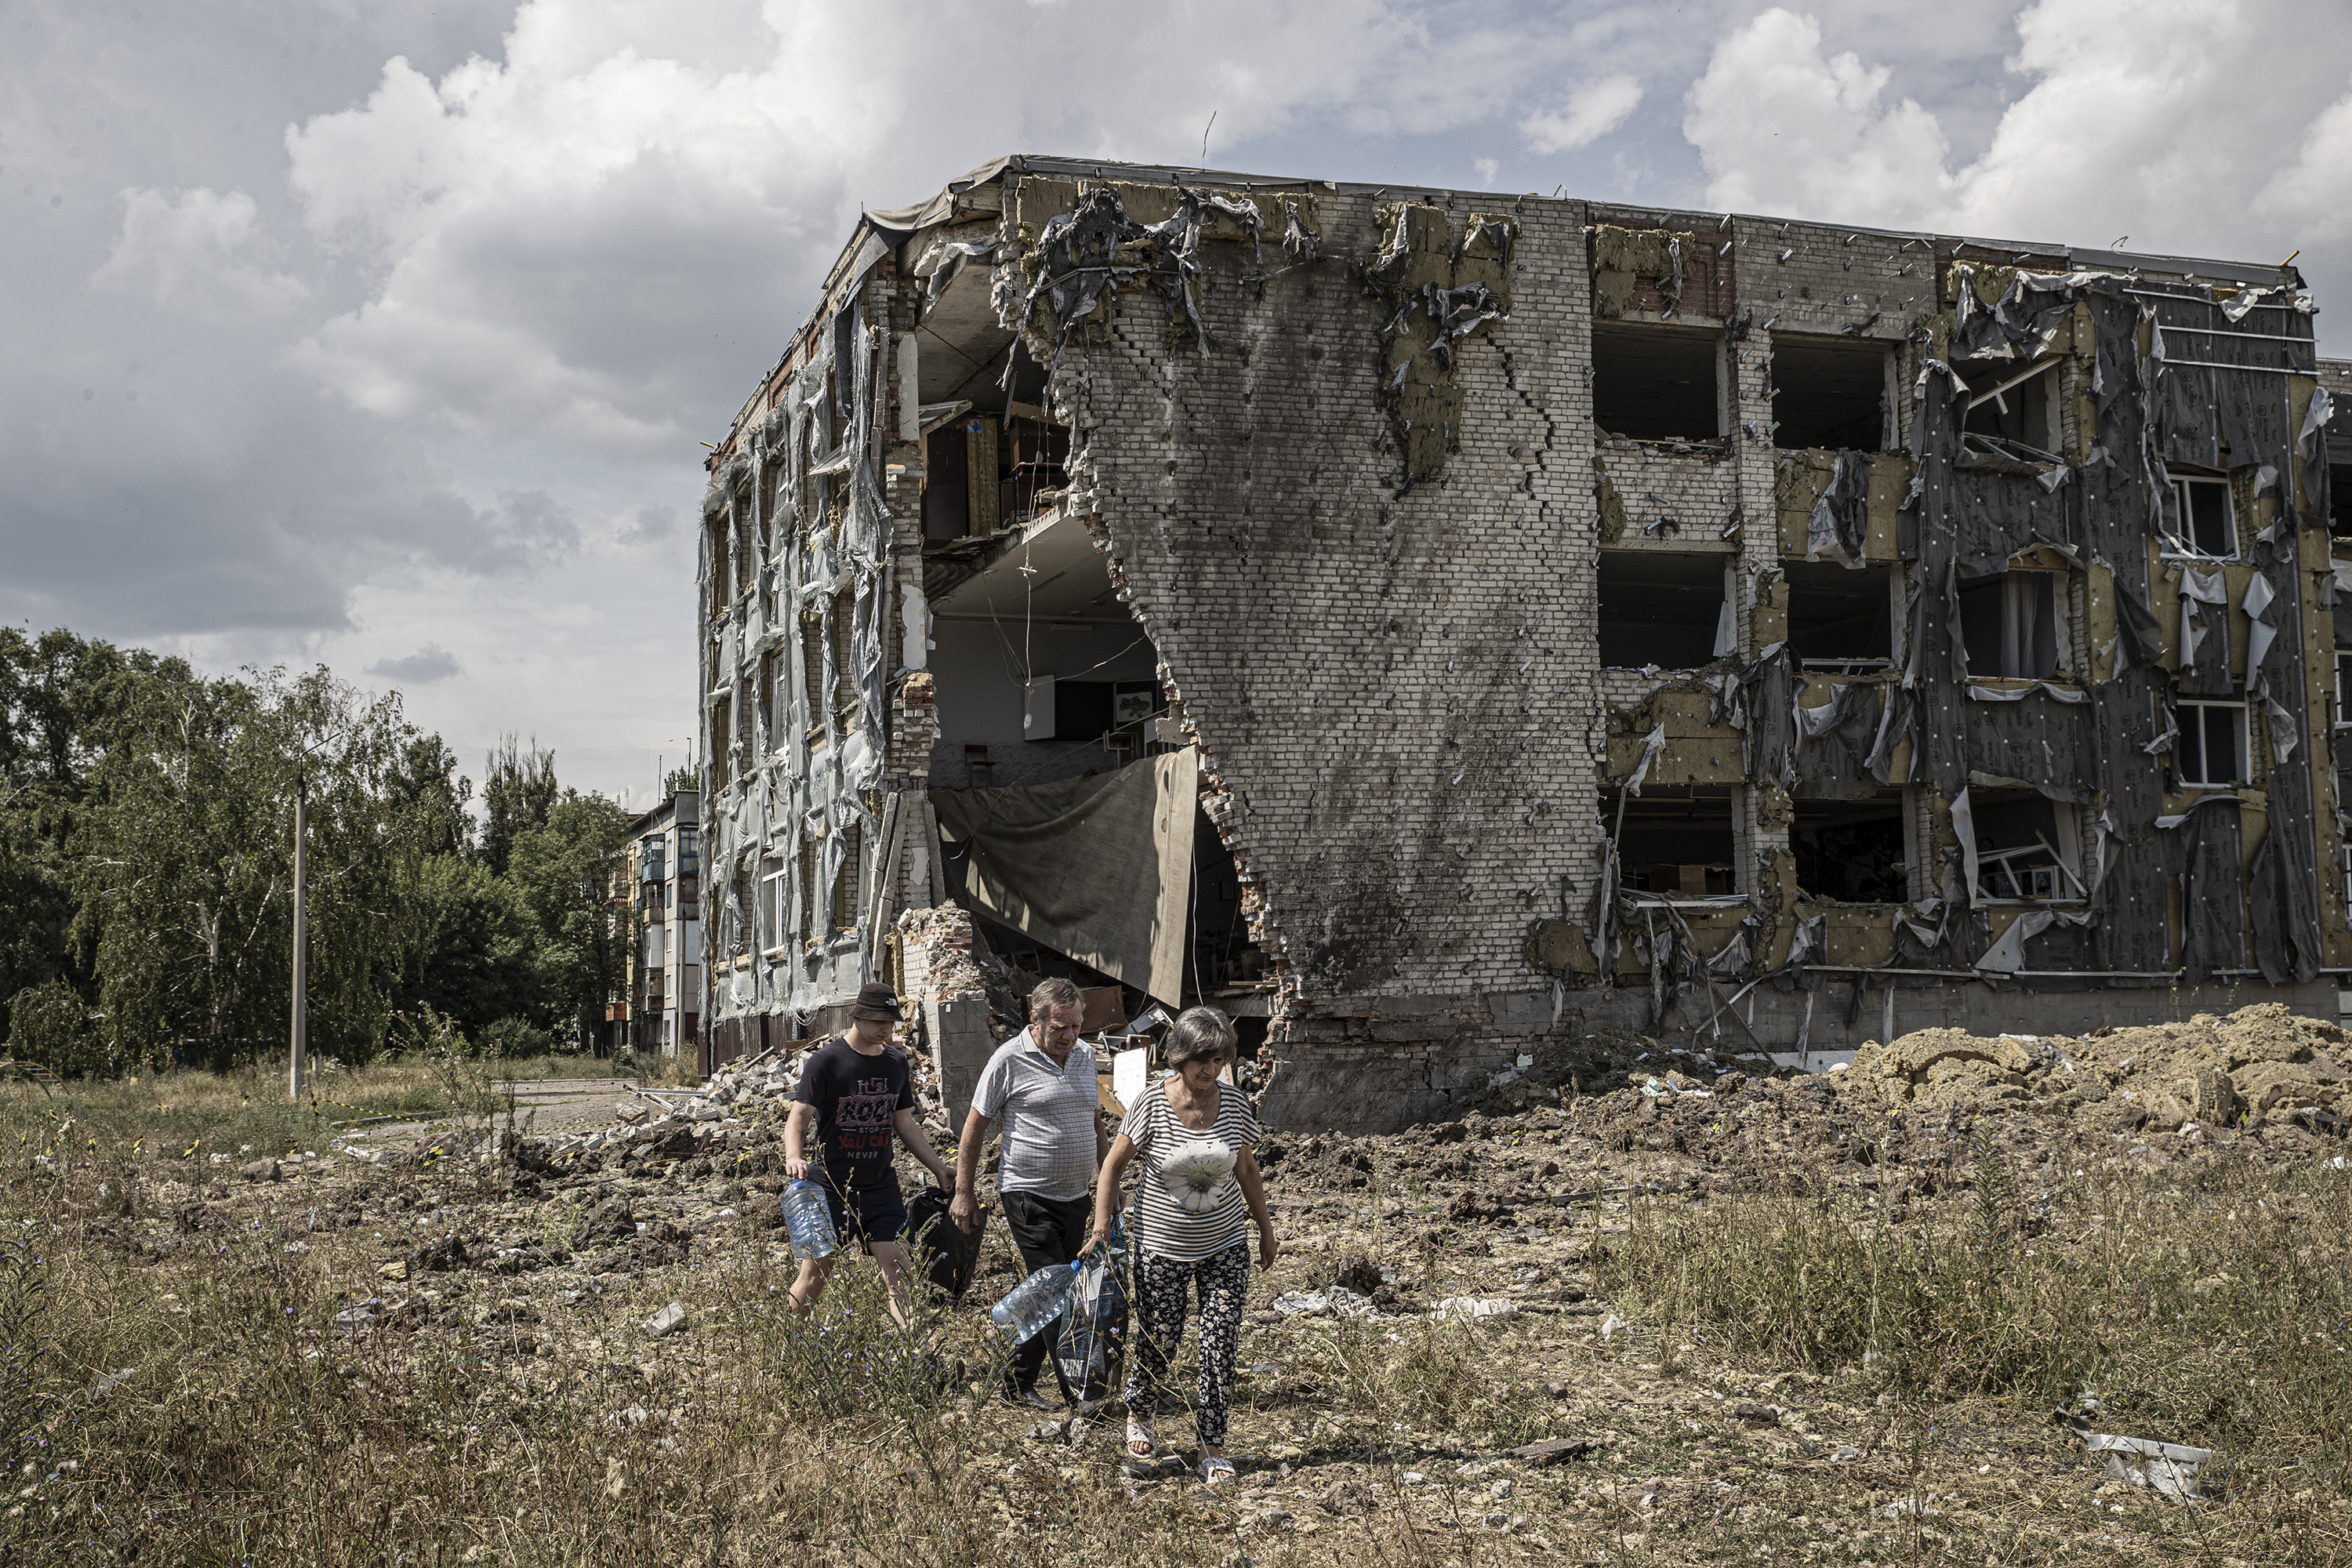 Russian air strikes continue increasingly in the Donetsk region, and the school seen in the photo is hit by attack on July 25.